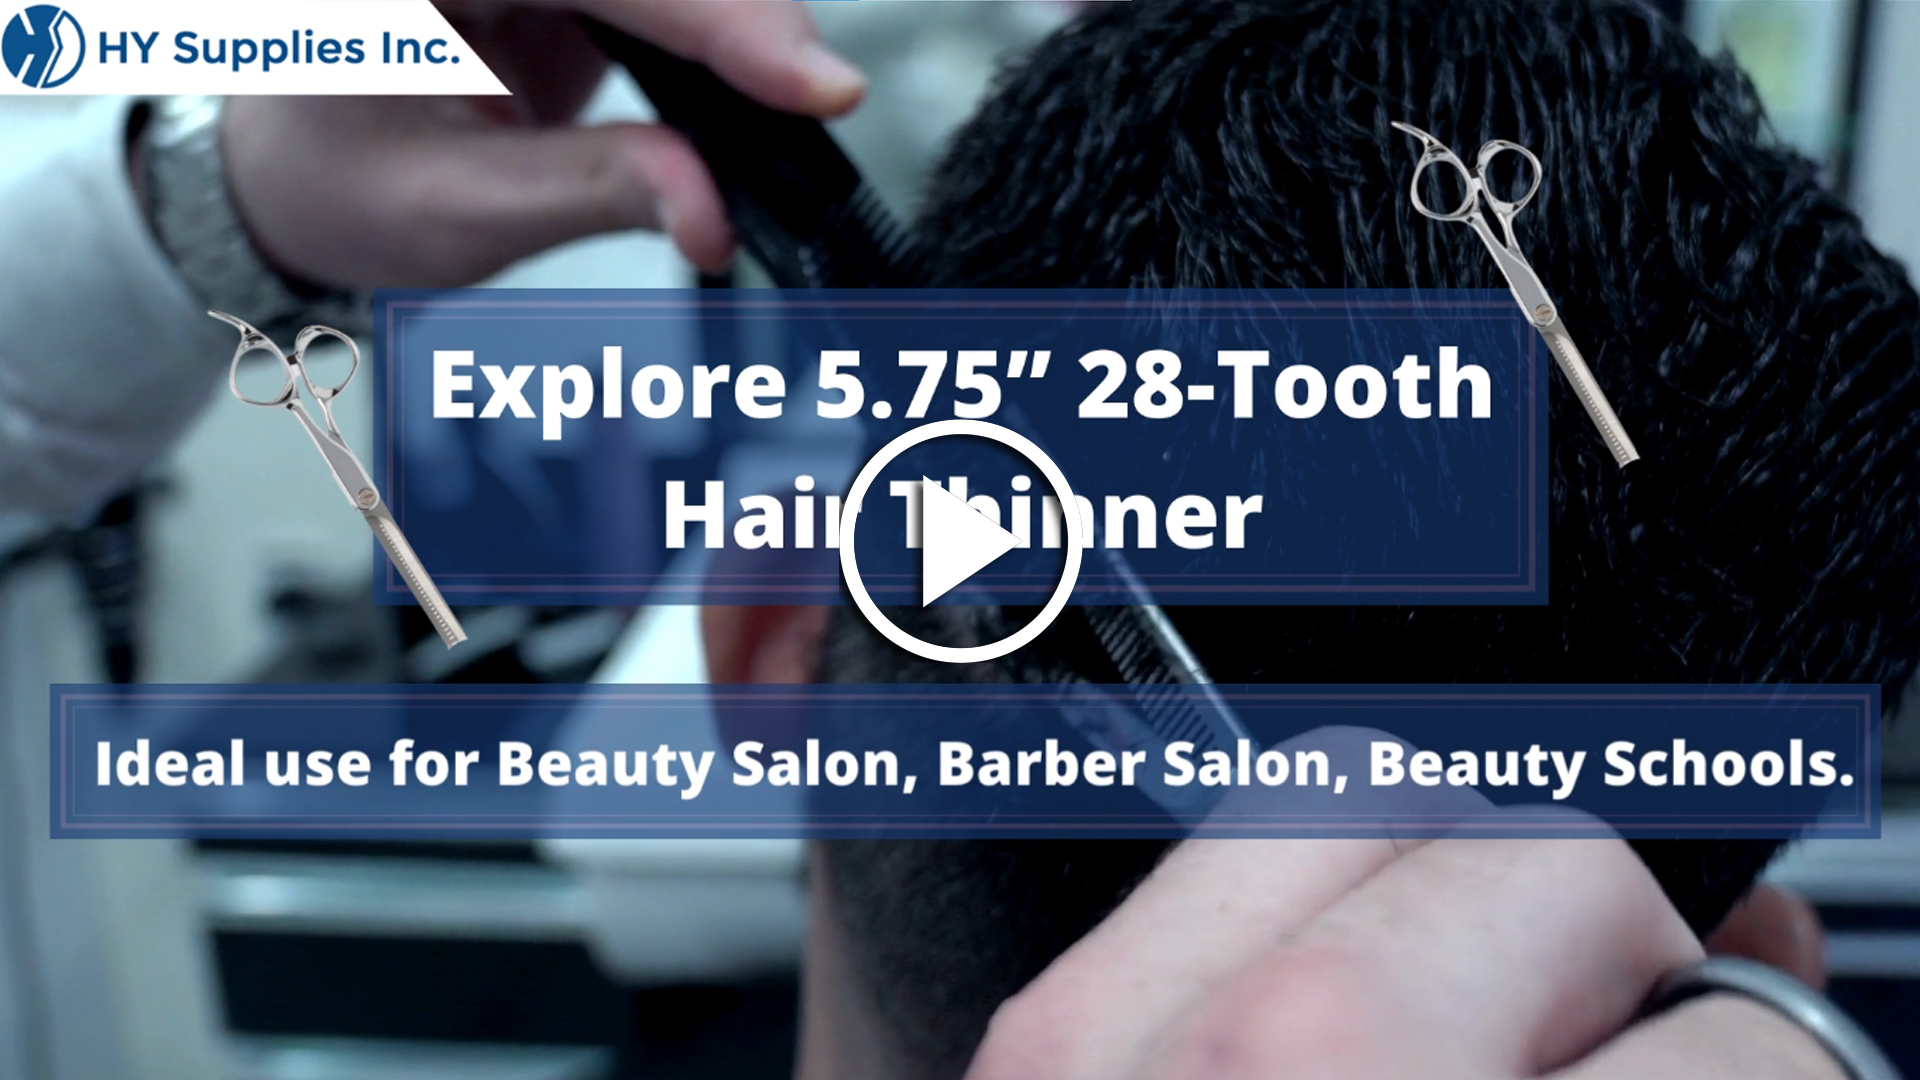 Explore 5.75” 28-Tooth Hair Thinner